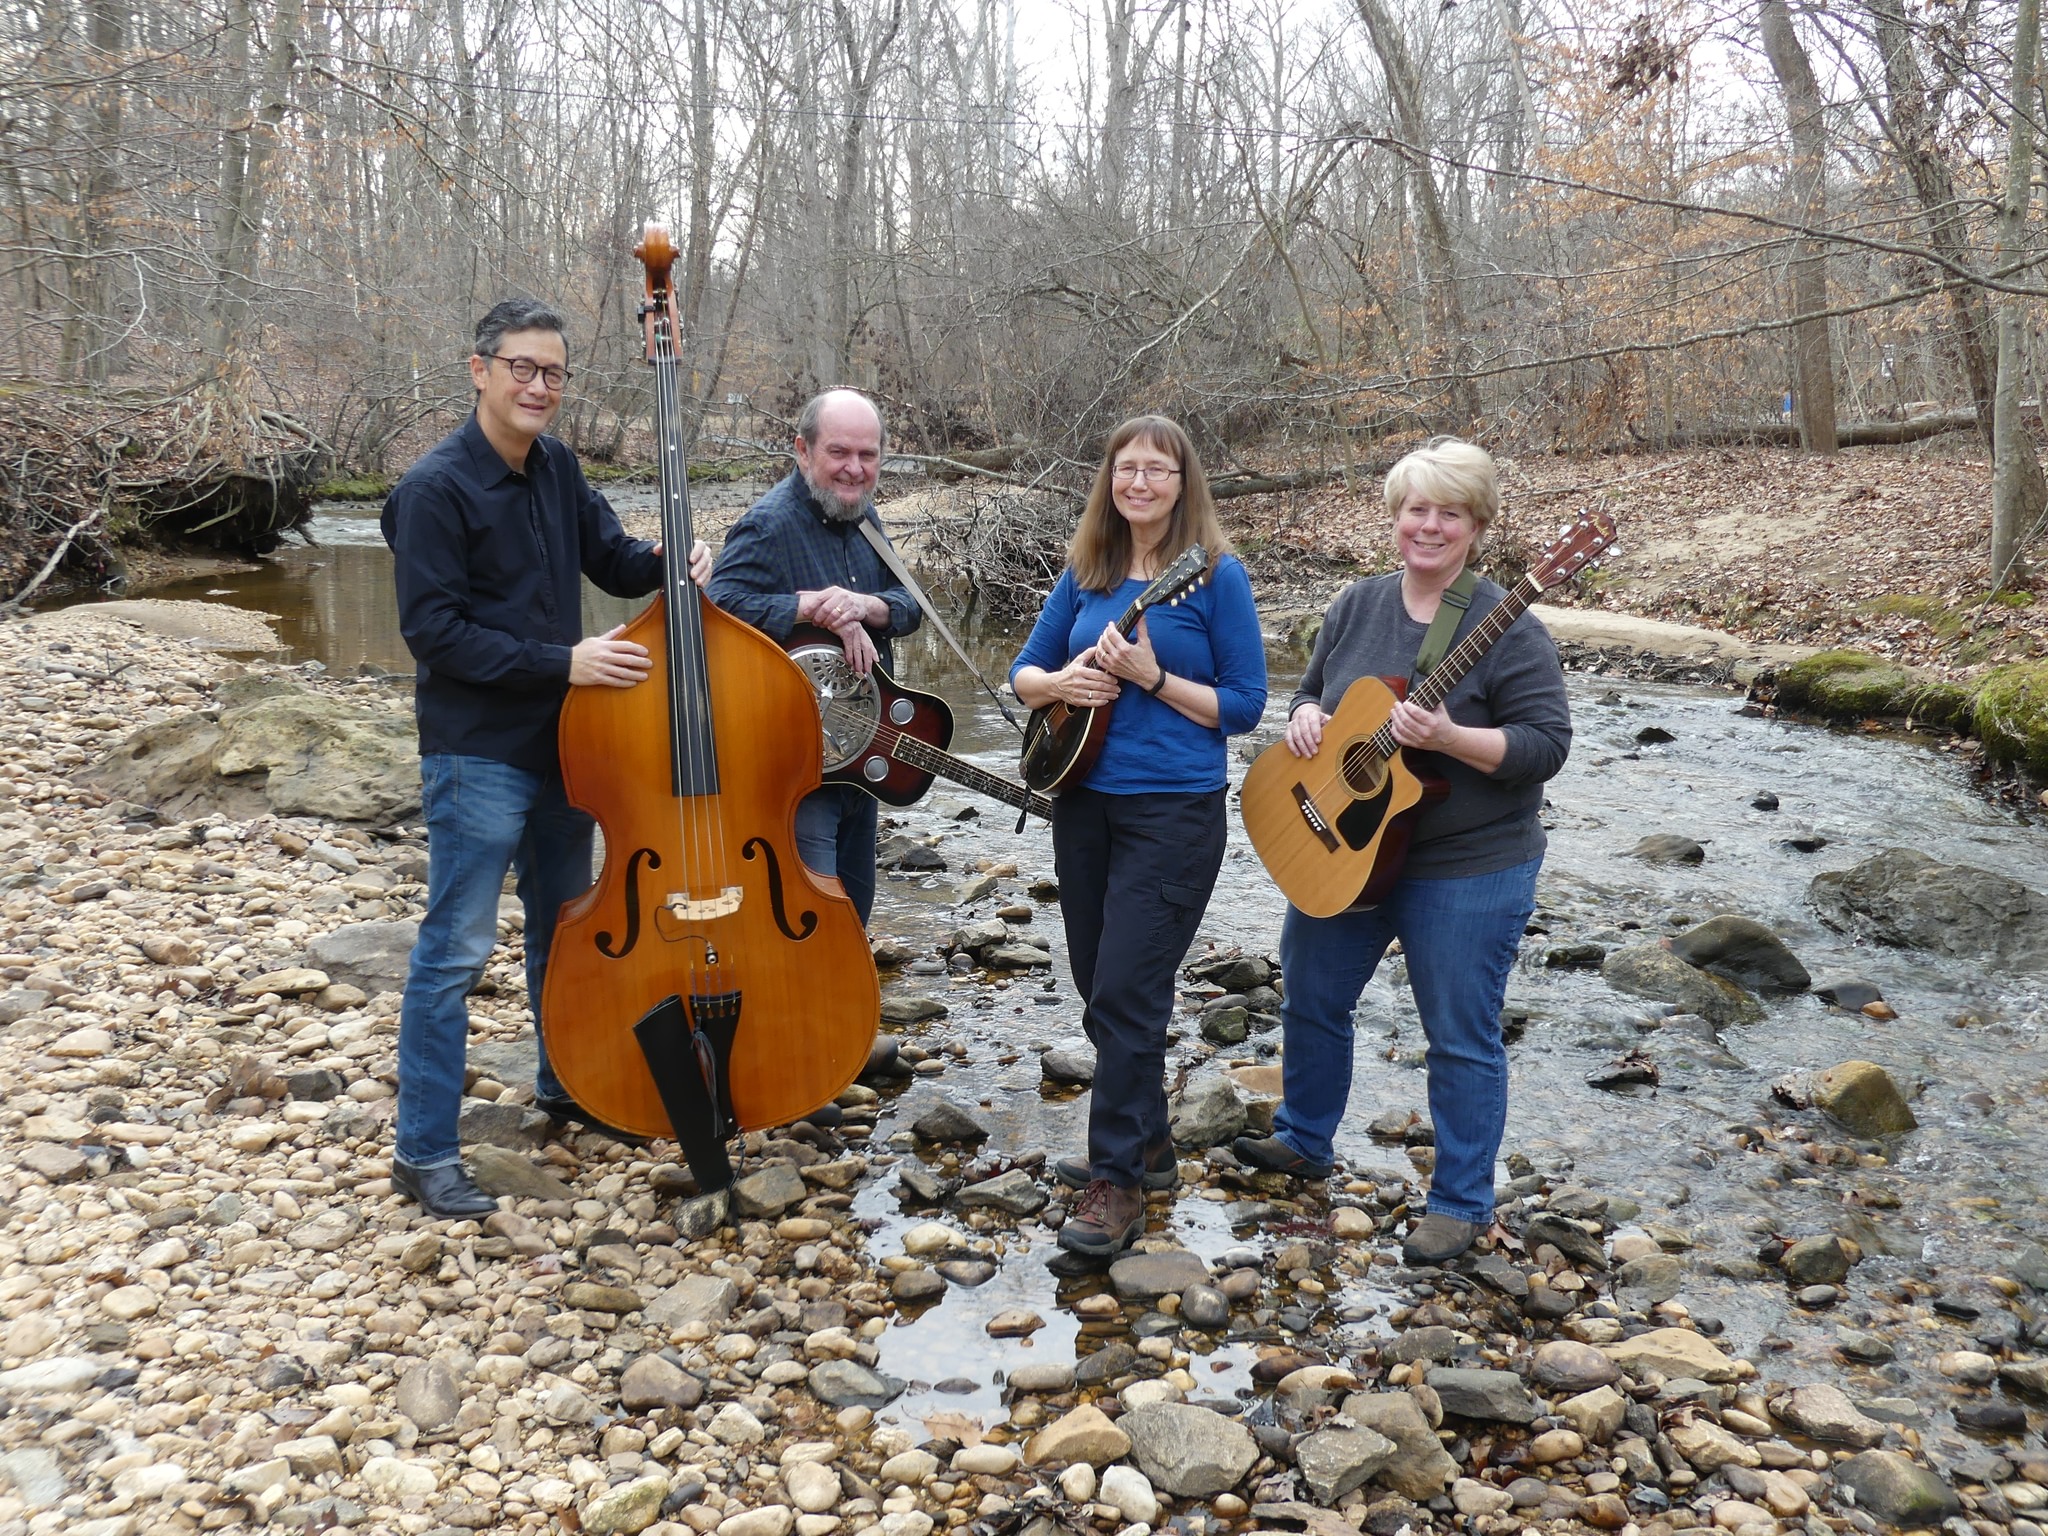 4 people with instruments by a creek